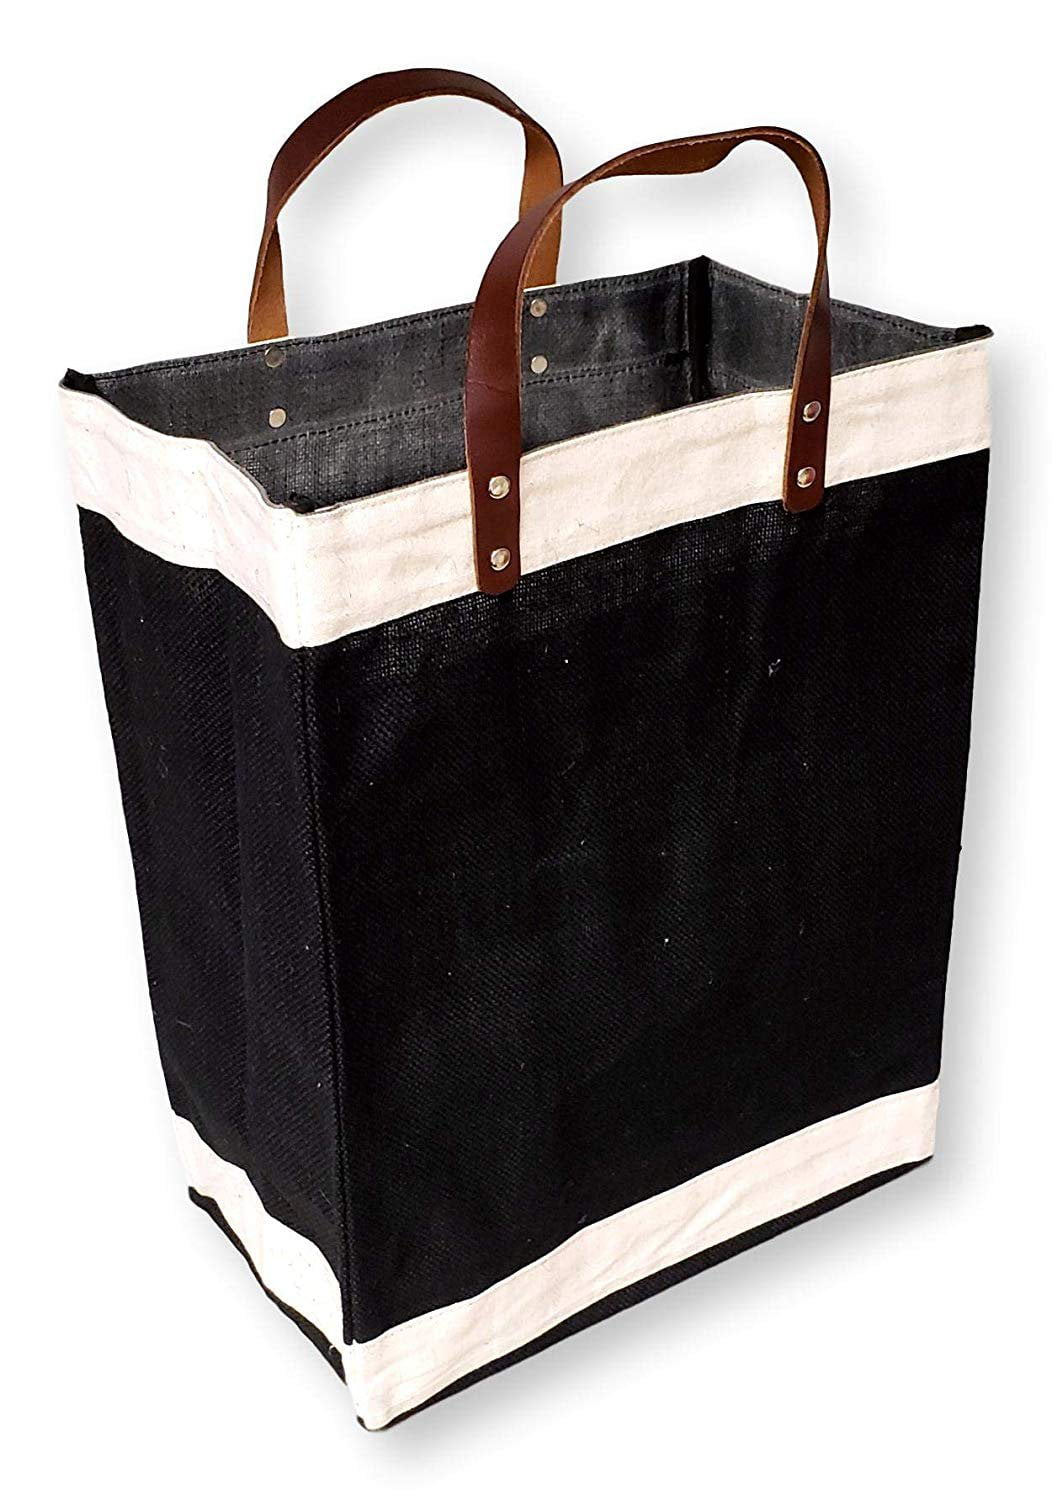 Eco-Friendly Large Jute and Cotton Leather Handle Market Tote Bag